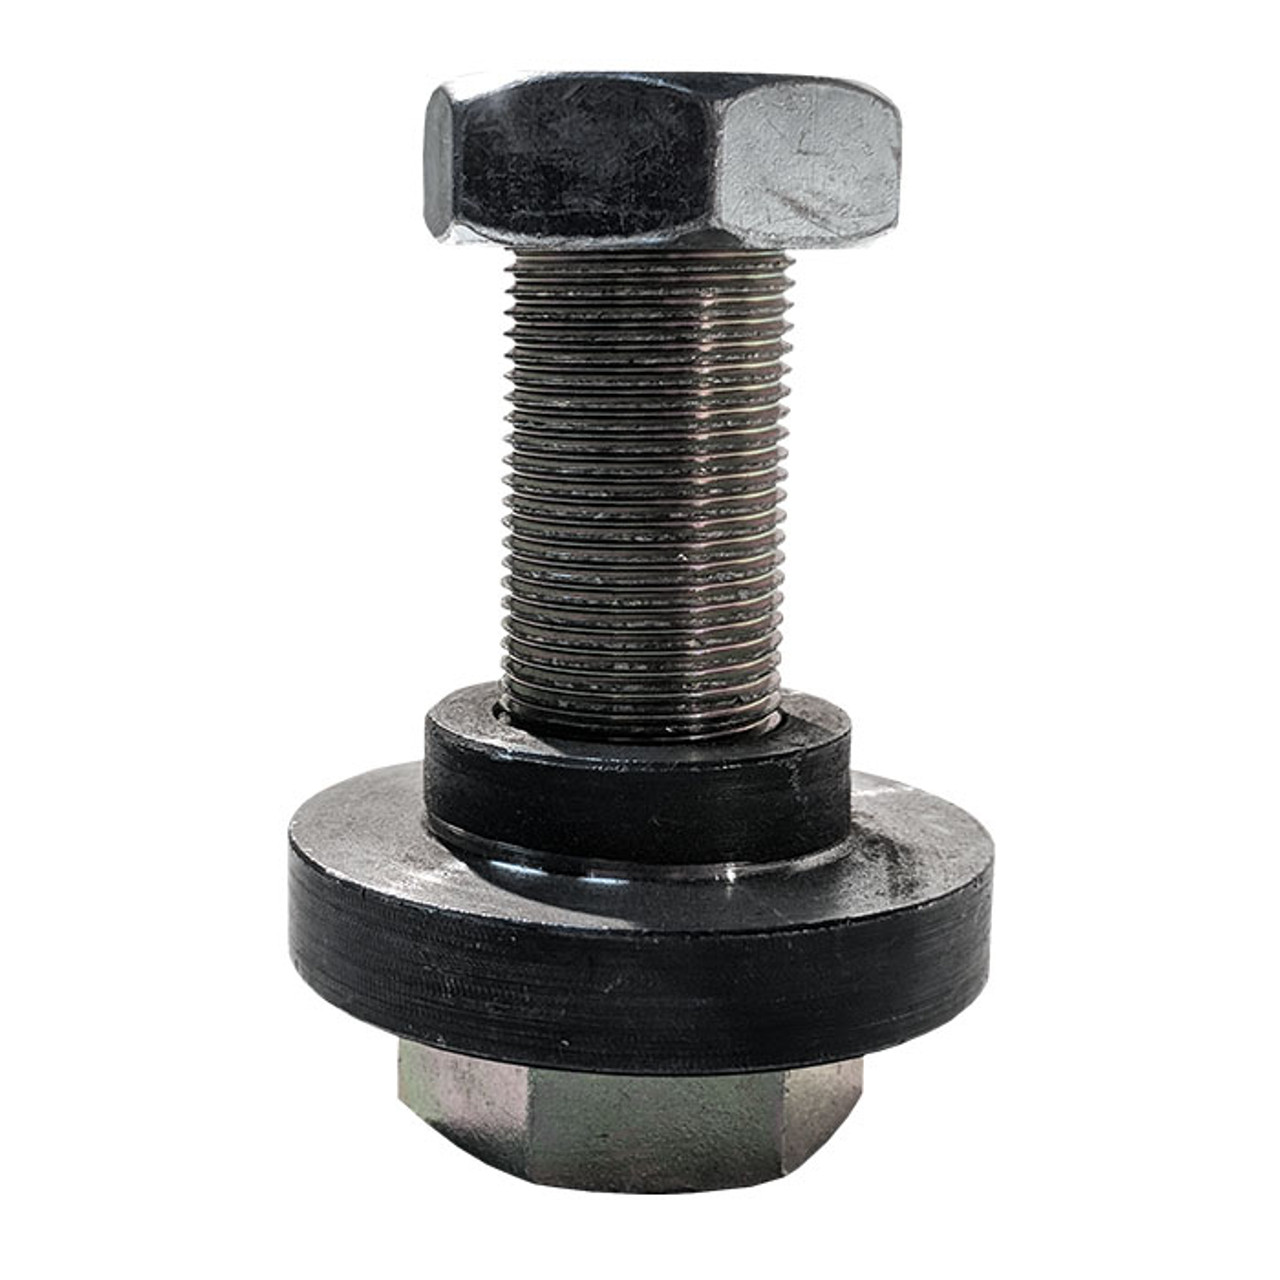 Blade Bolt Assy 1/2" [Kit], Commonly Fits Sidewinder